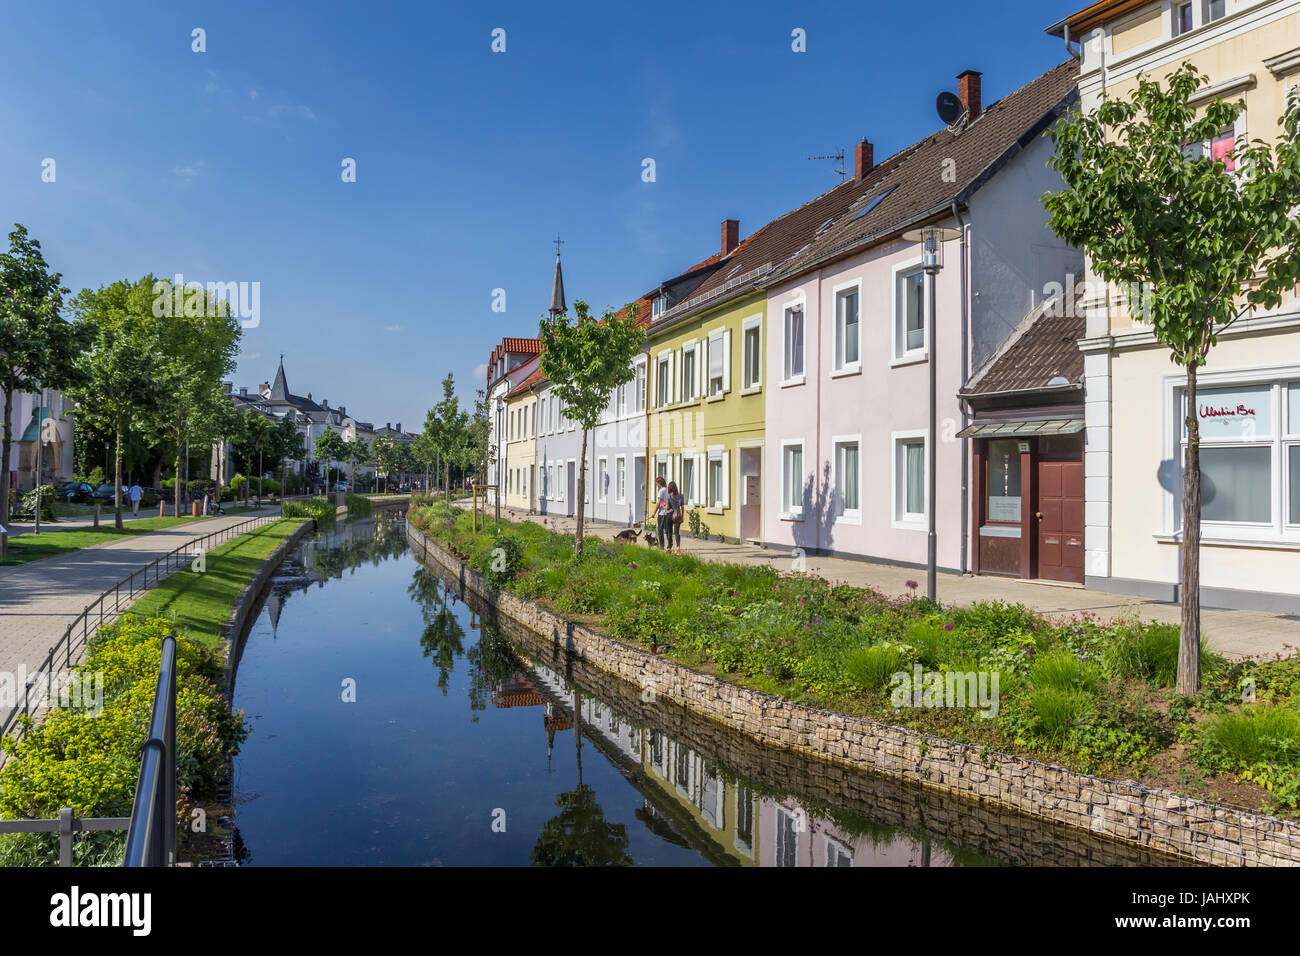 Colorful canal in the historic center of Detmold, Germany Stock Photo